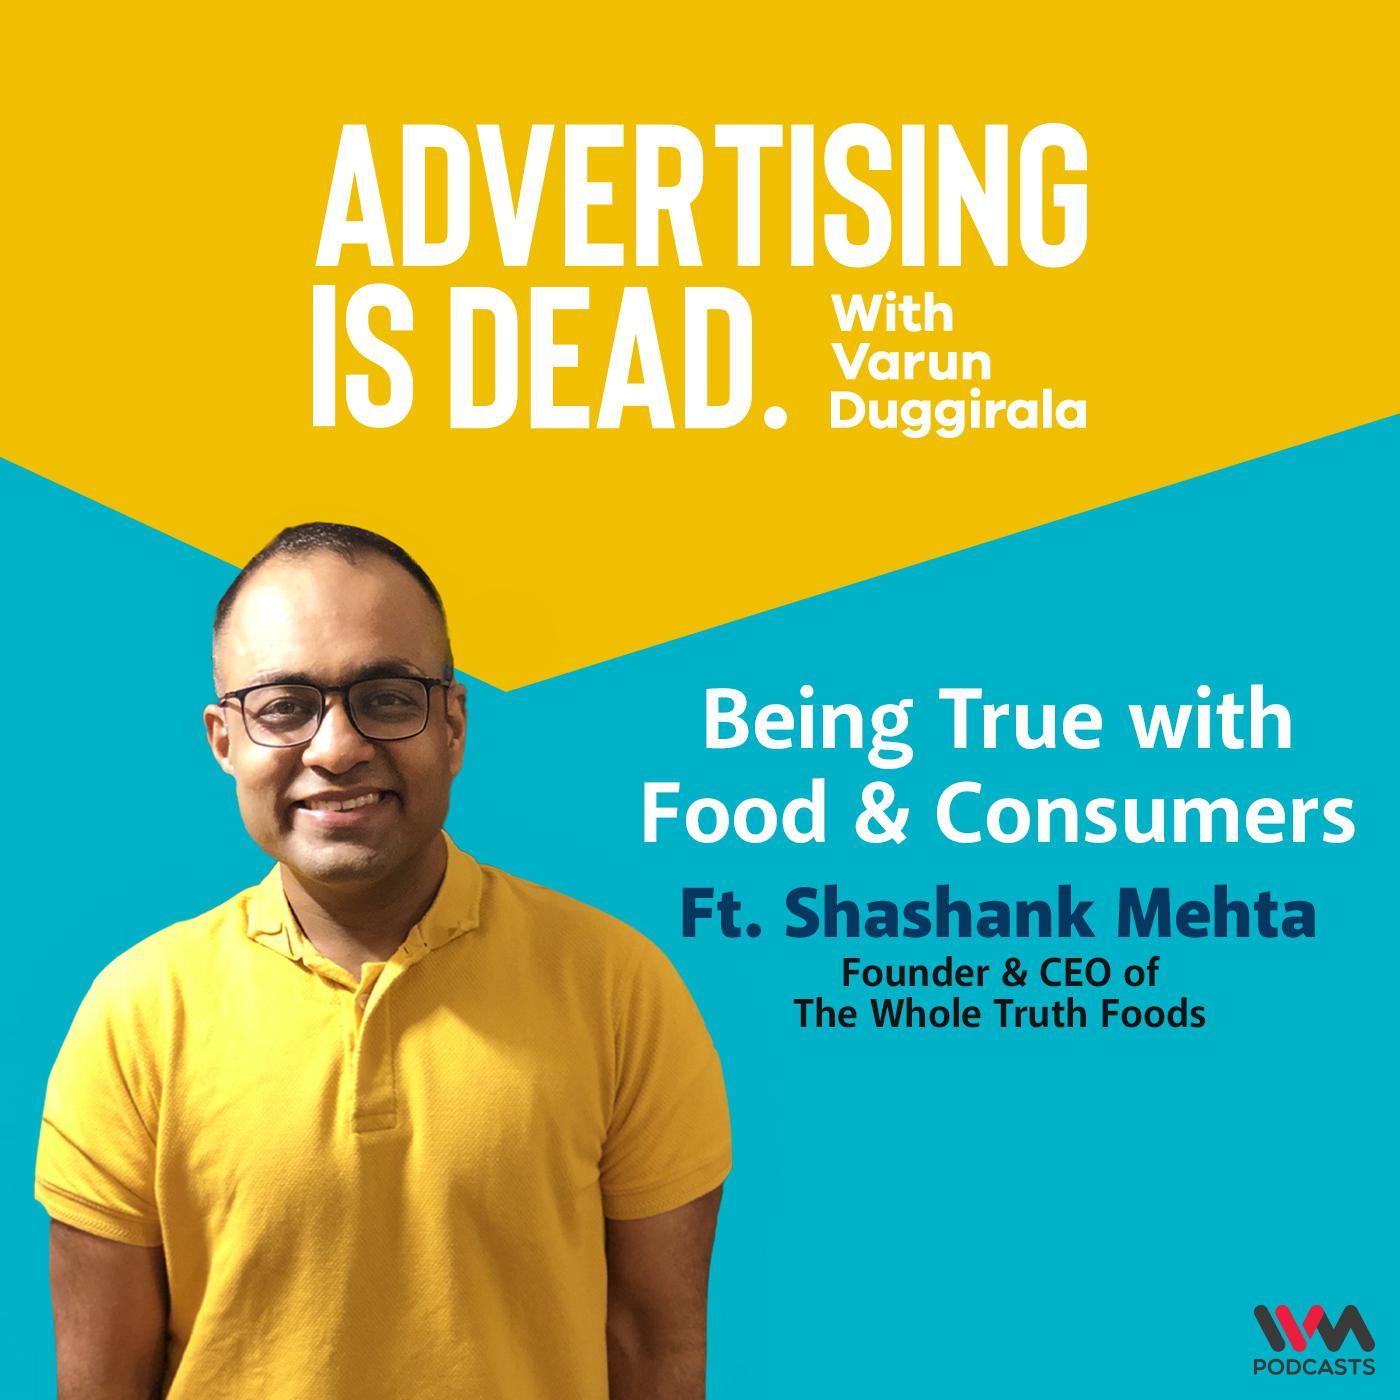 Being True with Food & Consumers